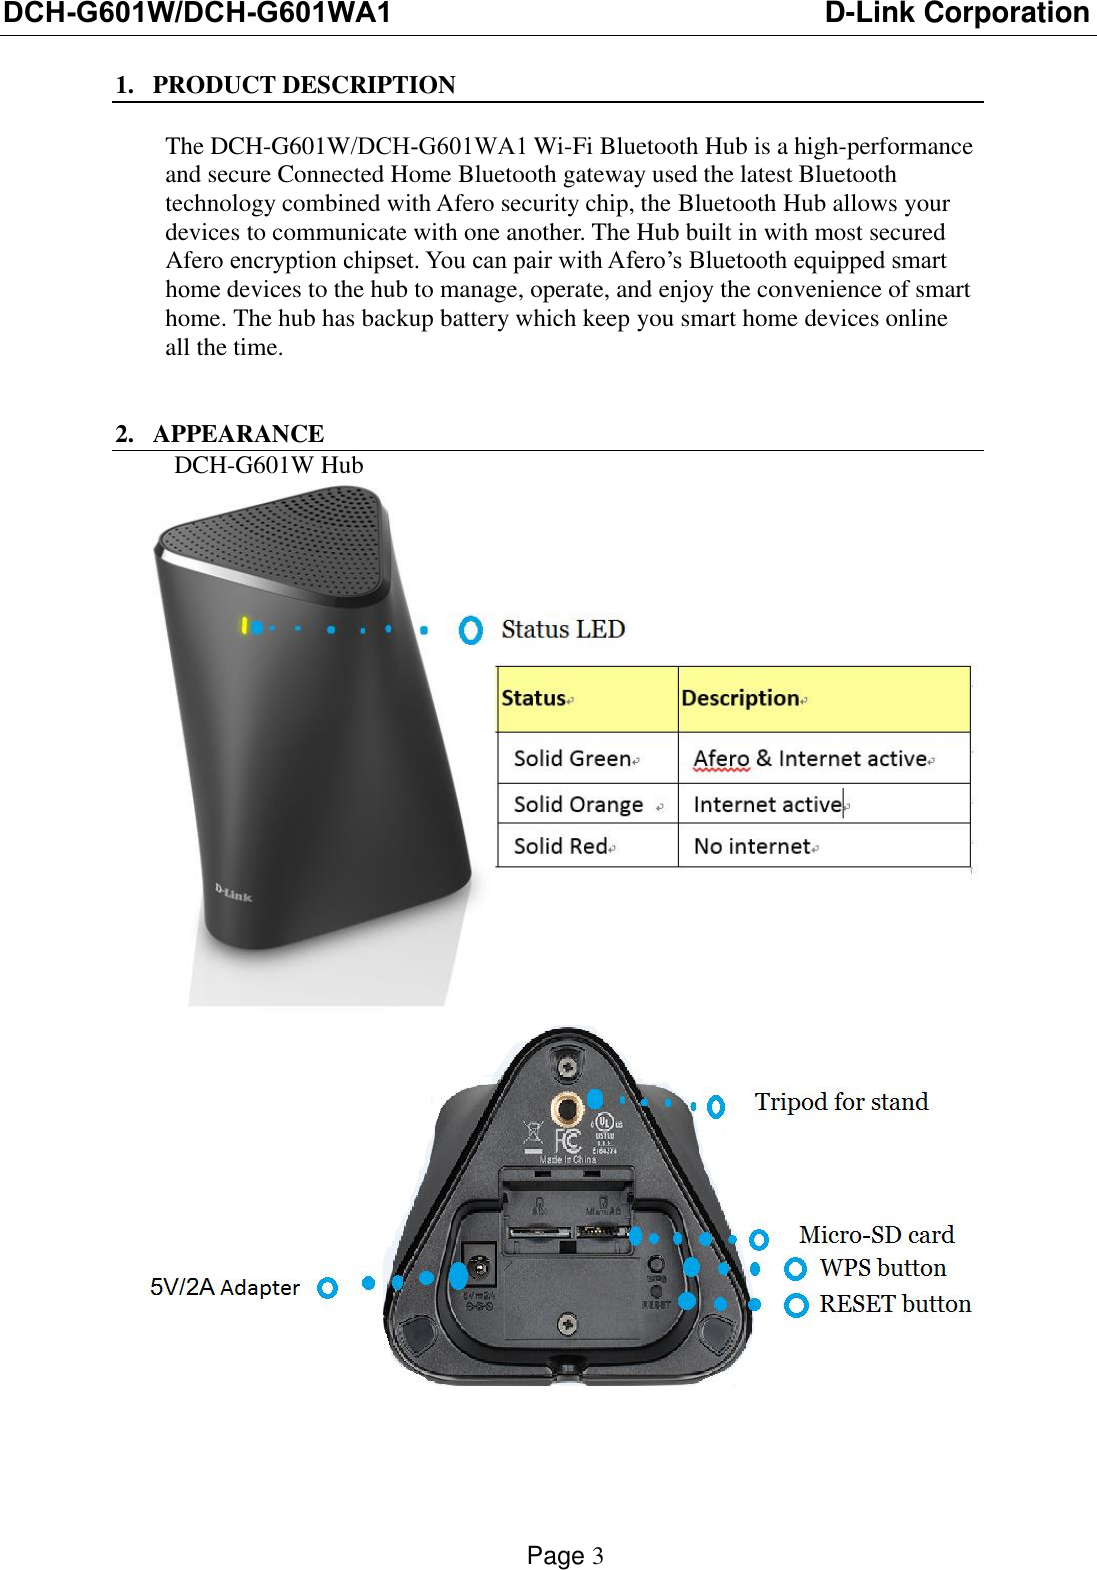 DCH-G601W/DCH-G601WA1 D-Link CorporationPage 3 1. PRODUCT DESCRIPTIONThe DCH-G601W/DCH-G601WA1 Wi-Fi Bluetooth Hub is a high-performance and secure Connected Home Bluetooth gateway used the latest Bluetooth technology combined with Afero security chip, the Bluetooth Hub allows your devices to communicate with one another. The Hub built in with most secured Afero encryption chipset. You can pair with Afero’s Bluetooth equipped smart home devices to the hub to manage, operate, and enjoy the convenience of smart home. The hub has backup battery which keep you smart home devices online all the time. 2. APPEARANCEDCH-G601W Hub 